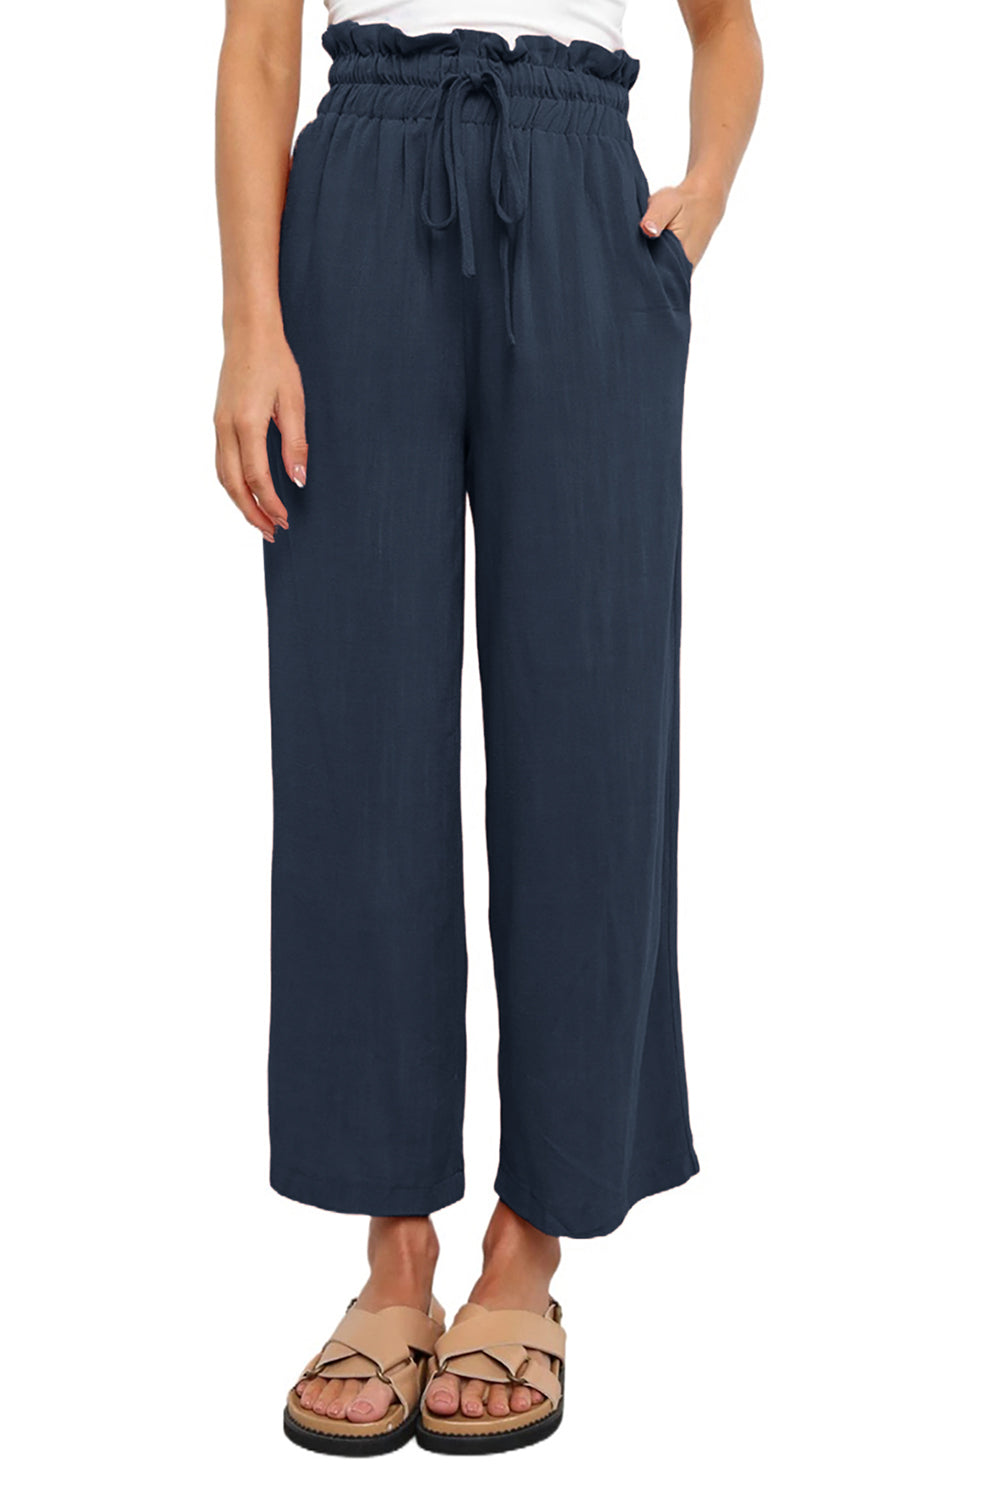 LC771296-5-S, LC771296-5-M, LC771296-5-L, LC771296-5-XL, Blue Women's High Waist Paper Bag Straight Leg Cropped Long Pants with Pocket